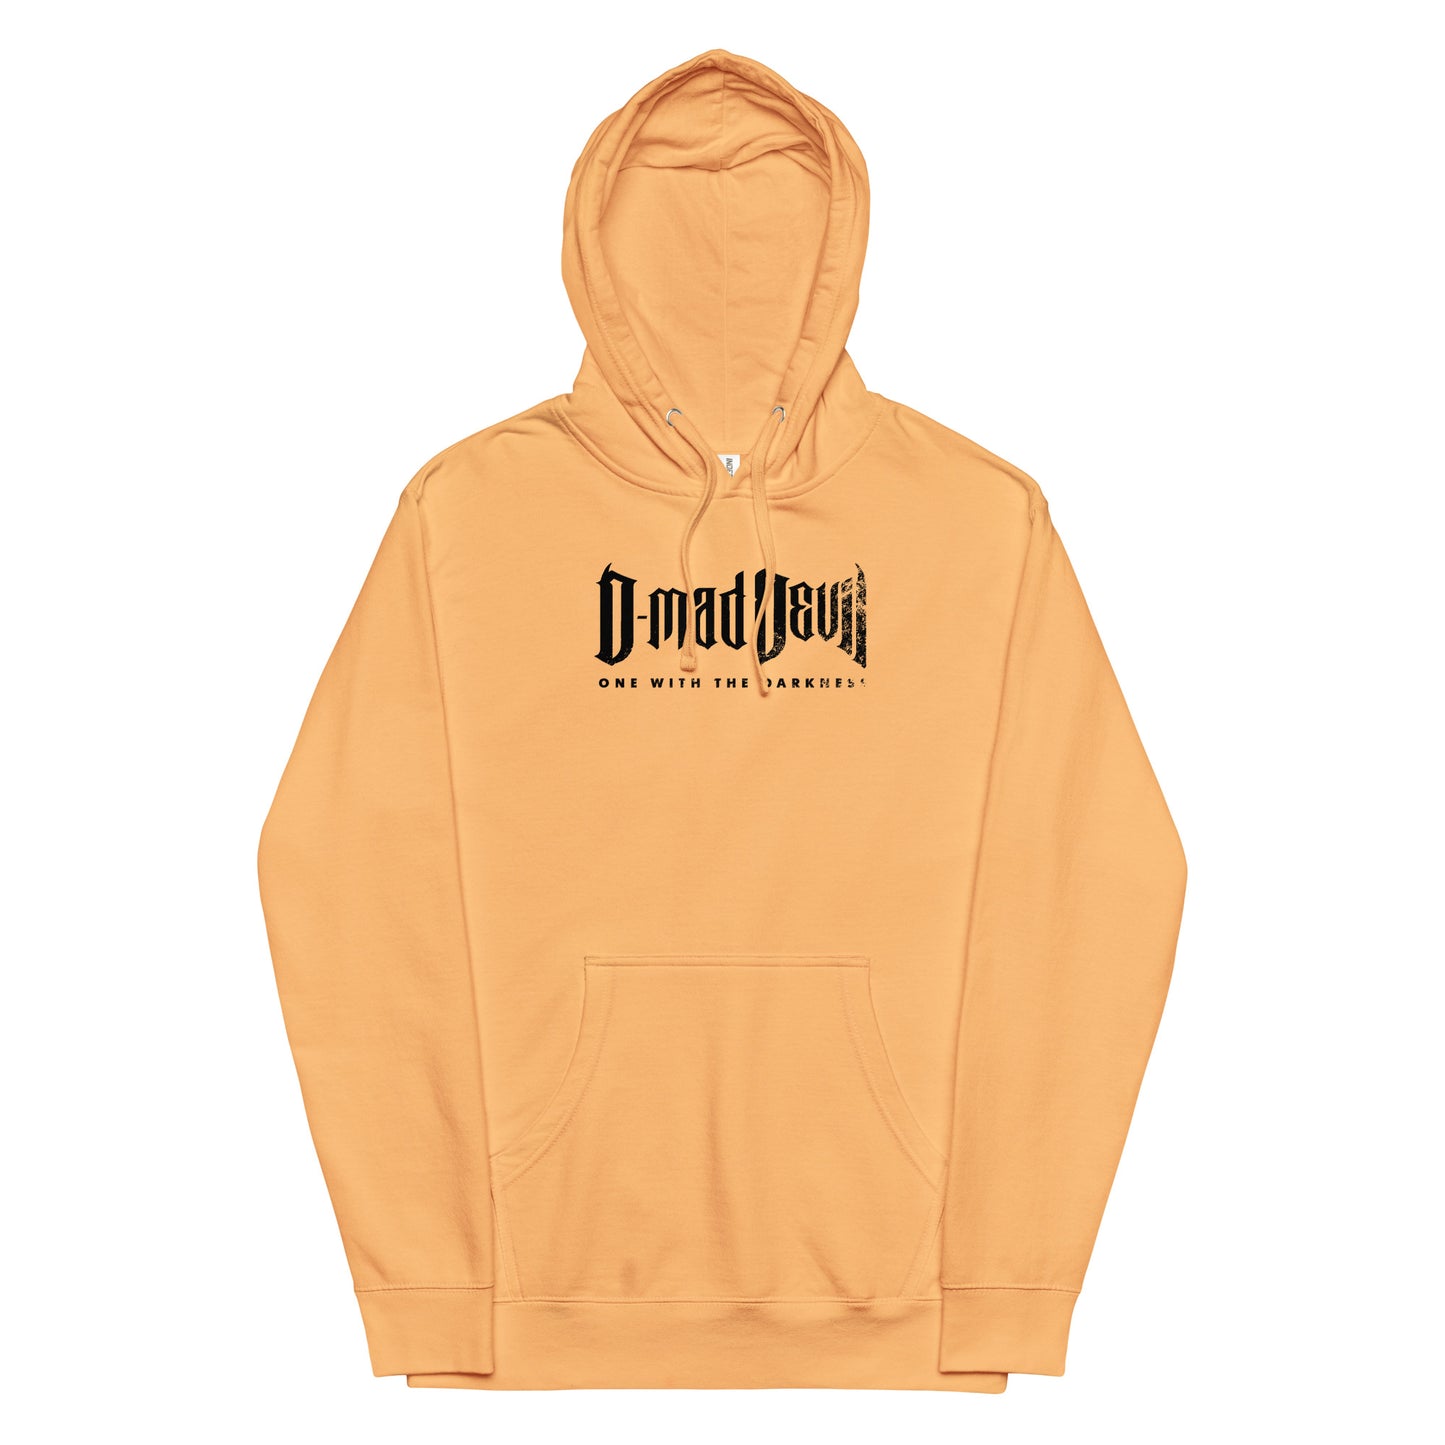 One With the Darkness Hoodie - Peach